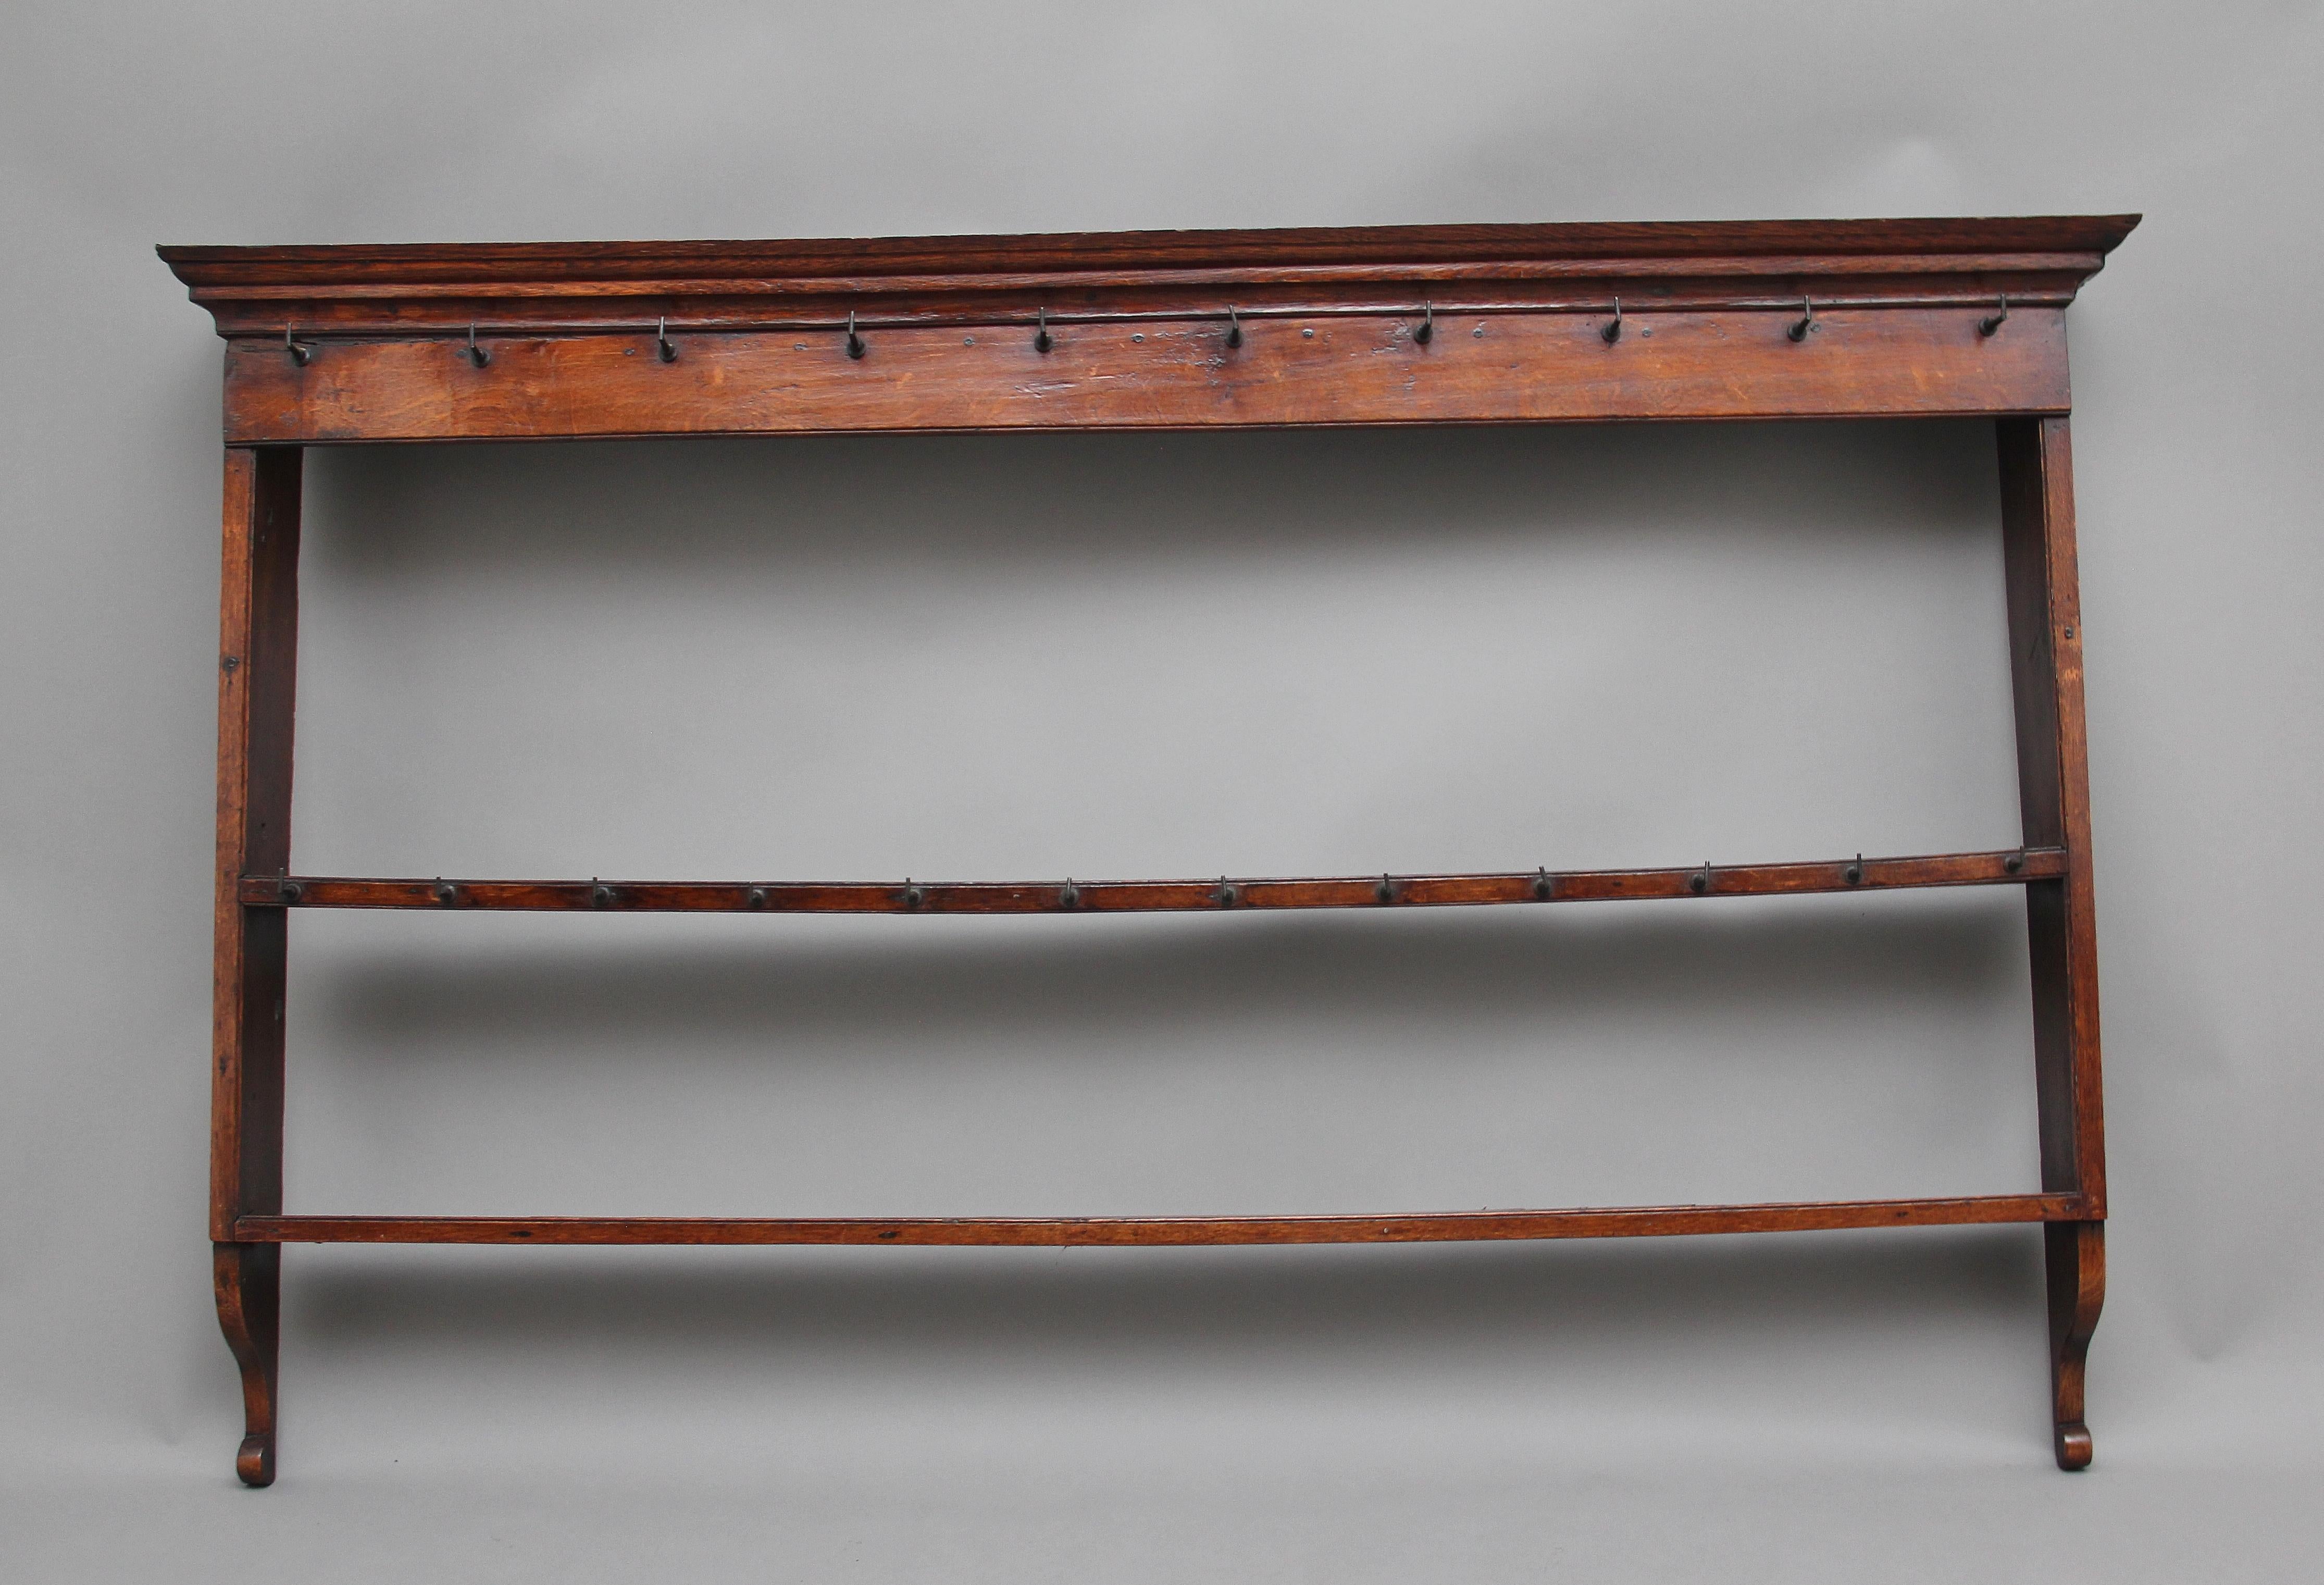 18th century oak hanging rack, the moulded cornice above a frieze rail with cup hooks, two open shelves with the top shelf also having cup hooks, shaped end supports. Lovely color, circa 1780.
      